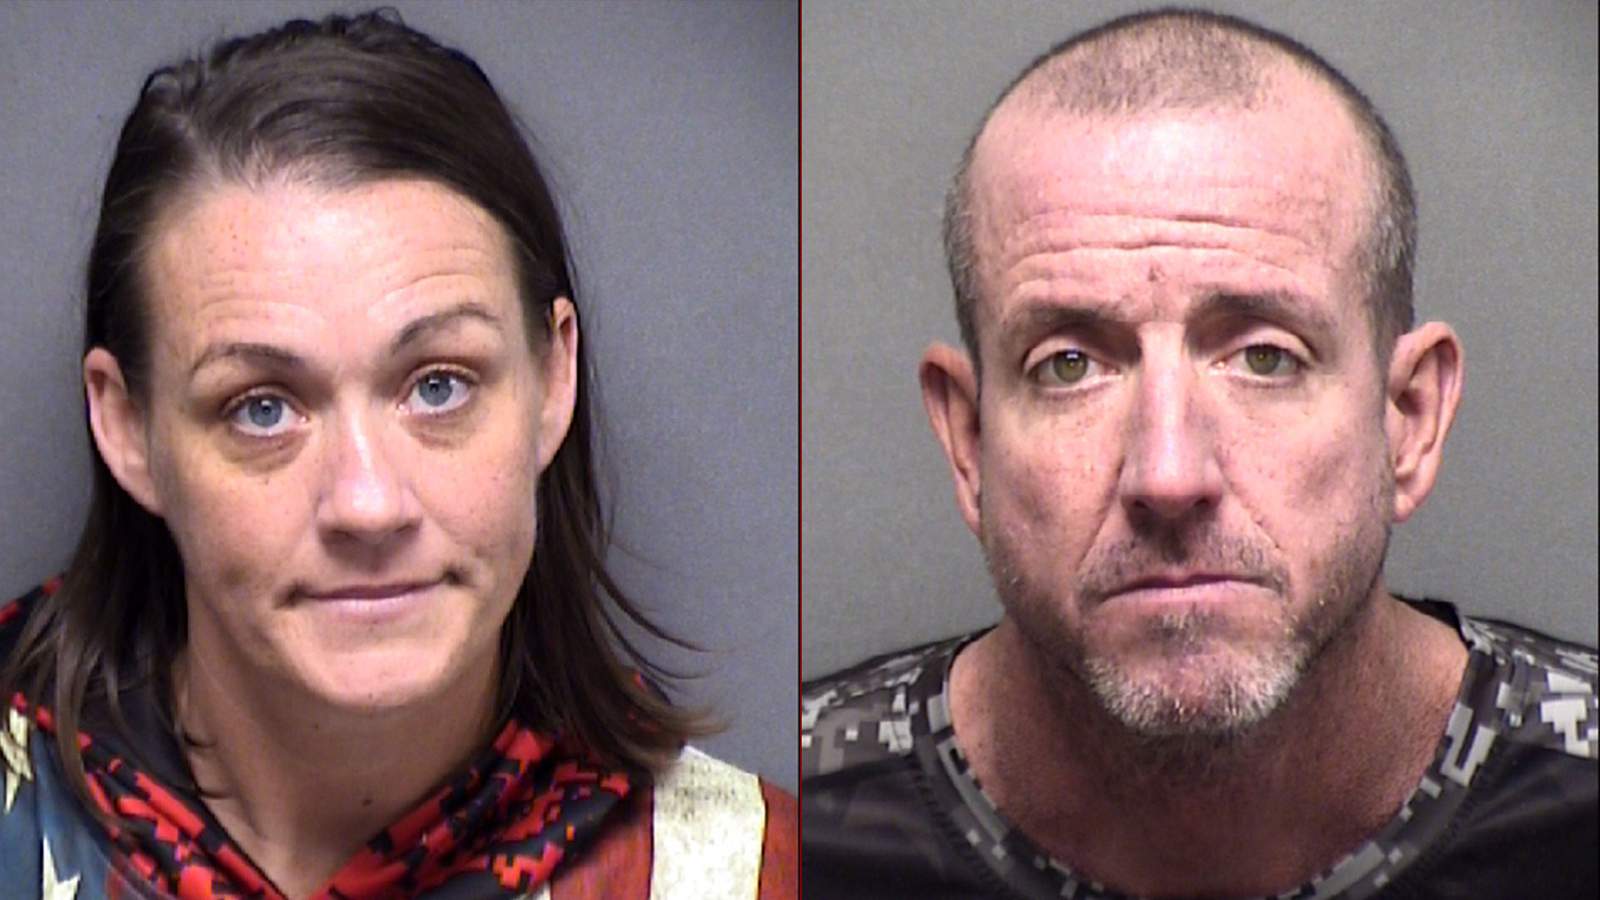 Converse couple arrested after forcing minors to drink and play games naked for years, affidavits says